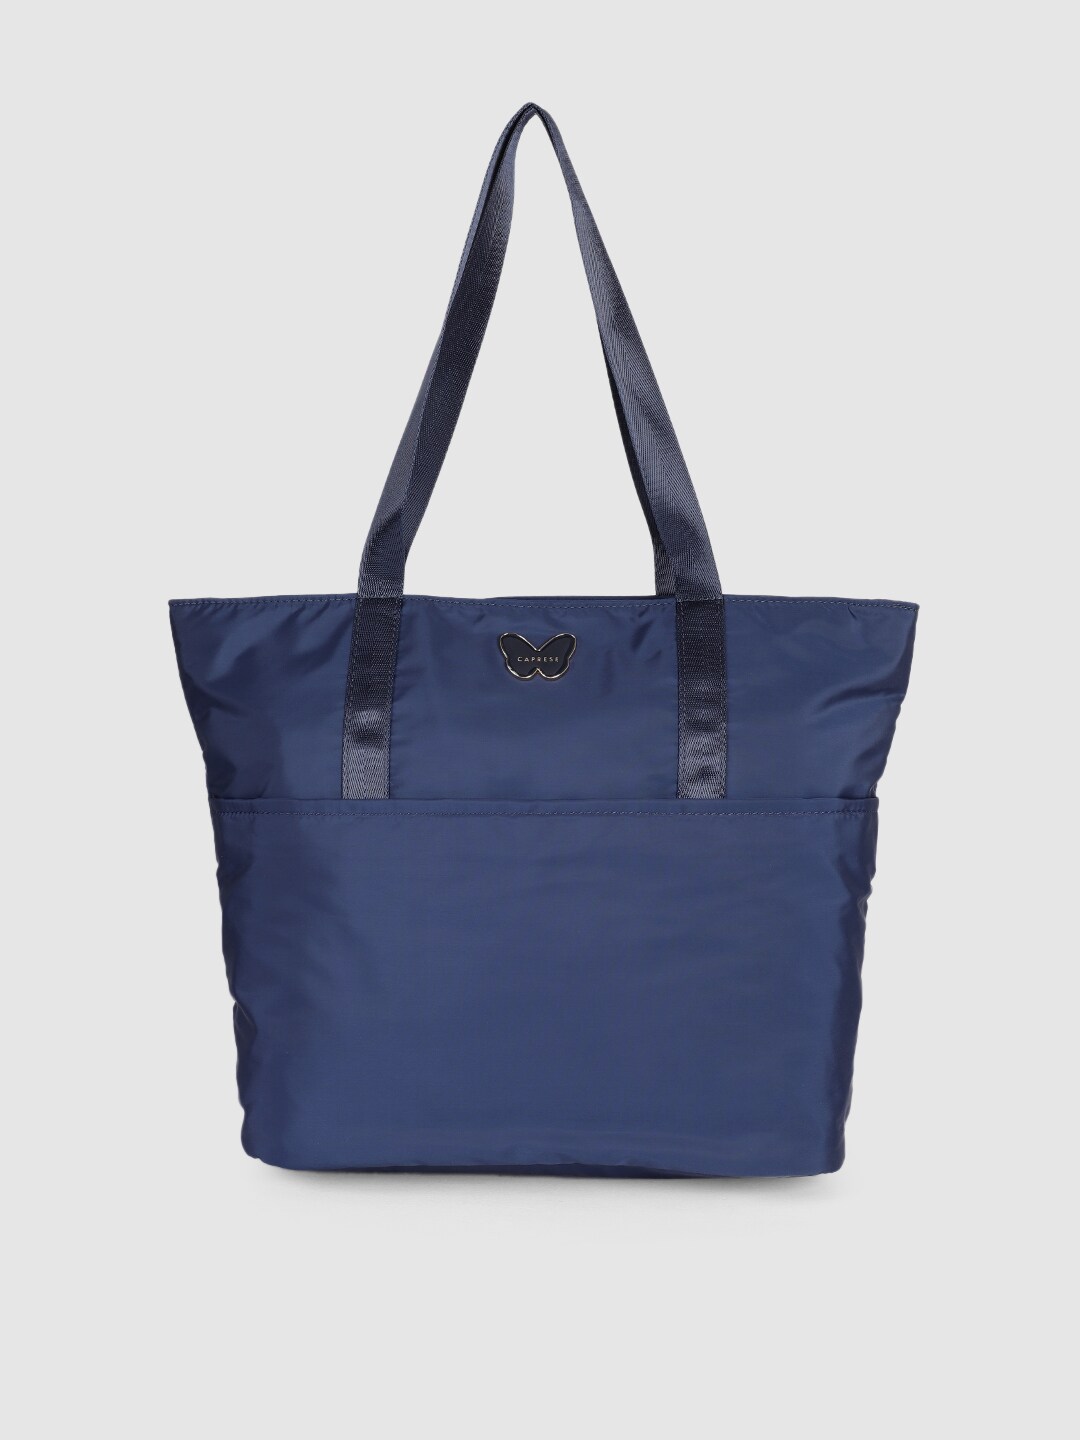 Caprese Navy Blue Solid Tote Bag Price in India